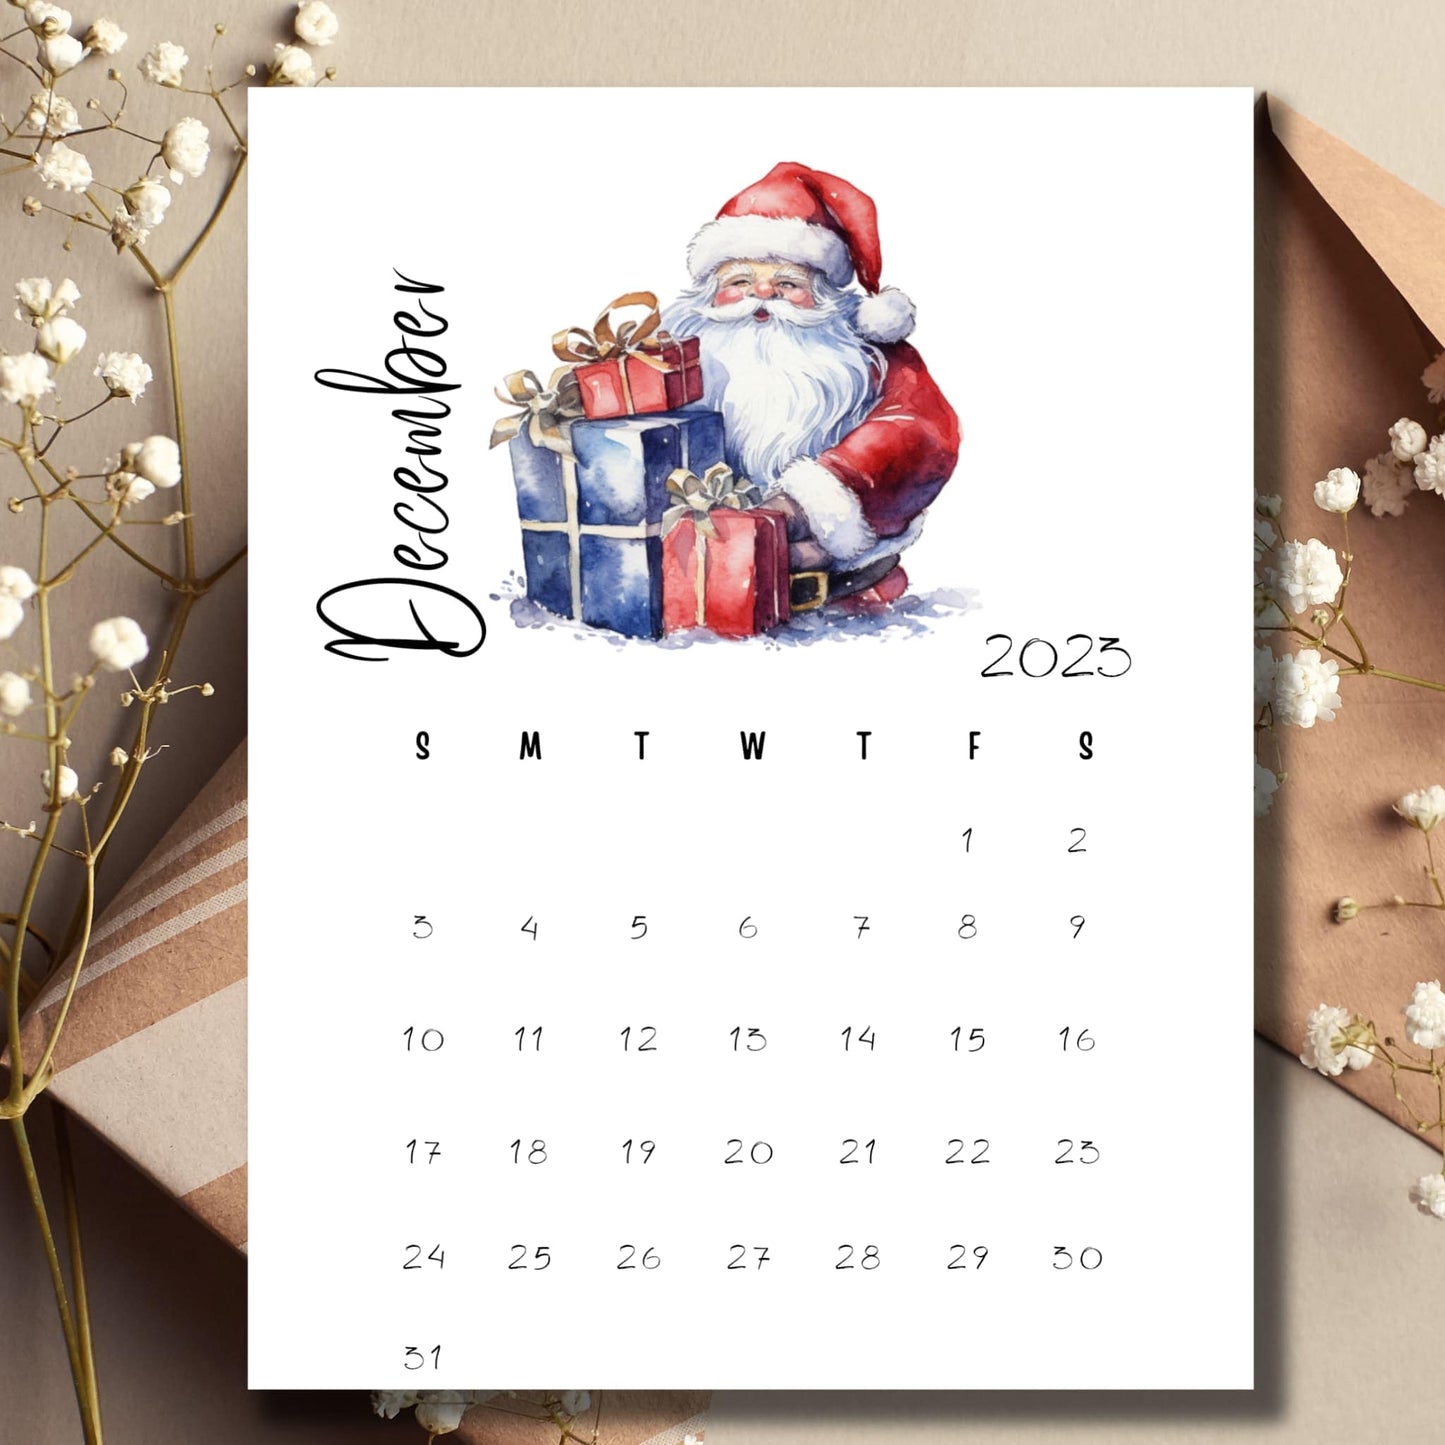 Beautiful Sarsari Creations December 2023 Printable Calendar, adorned with a crisp envelope and vibrant flowers, encapsulating the spirit of the holiday season in every detail.